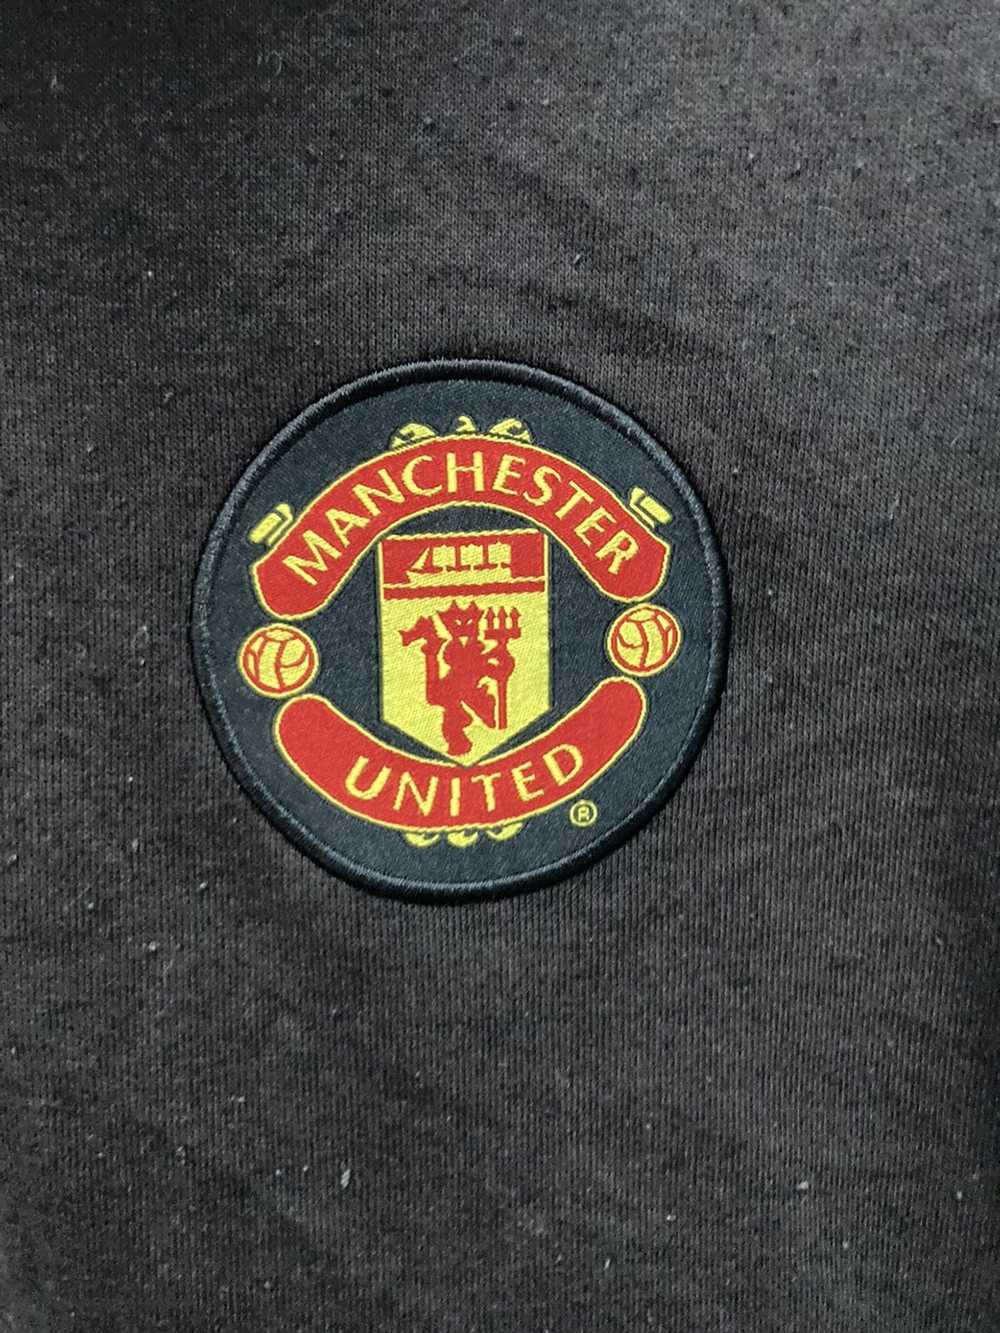 Manchester United × Sportswear Manchester united … - image 5